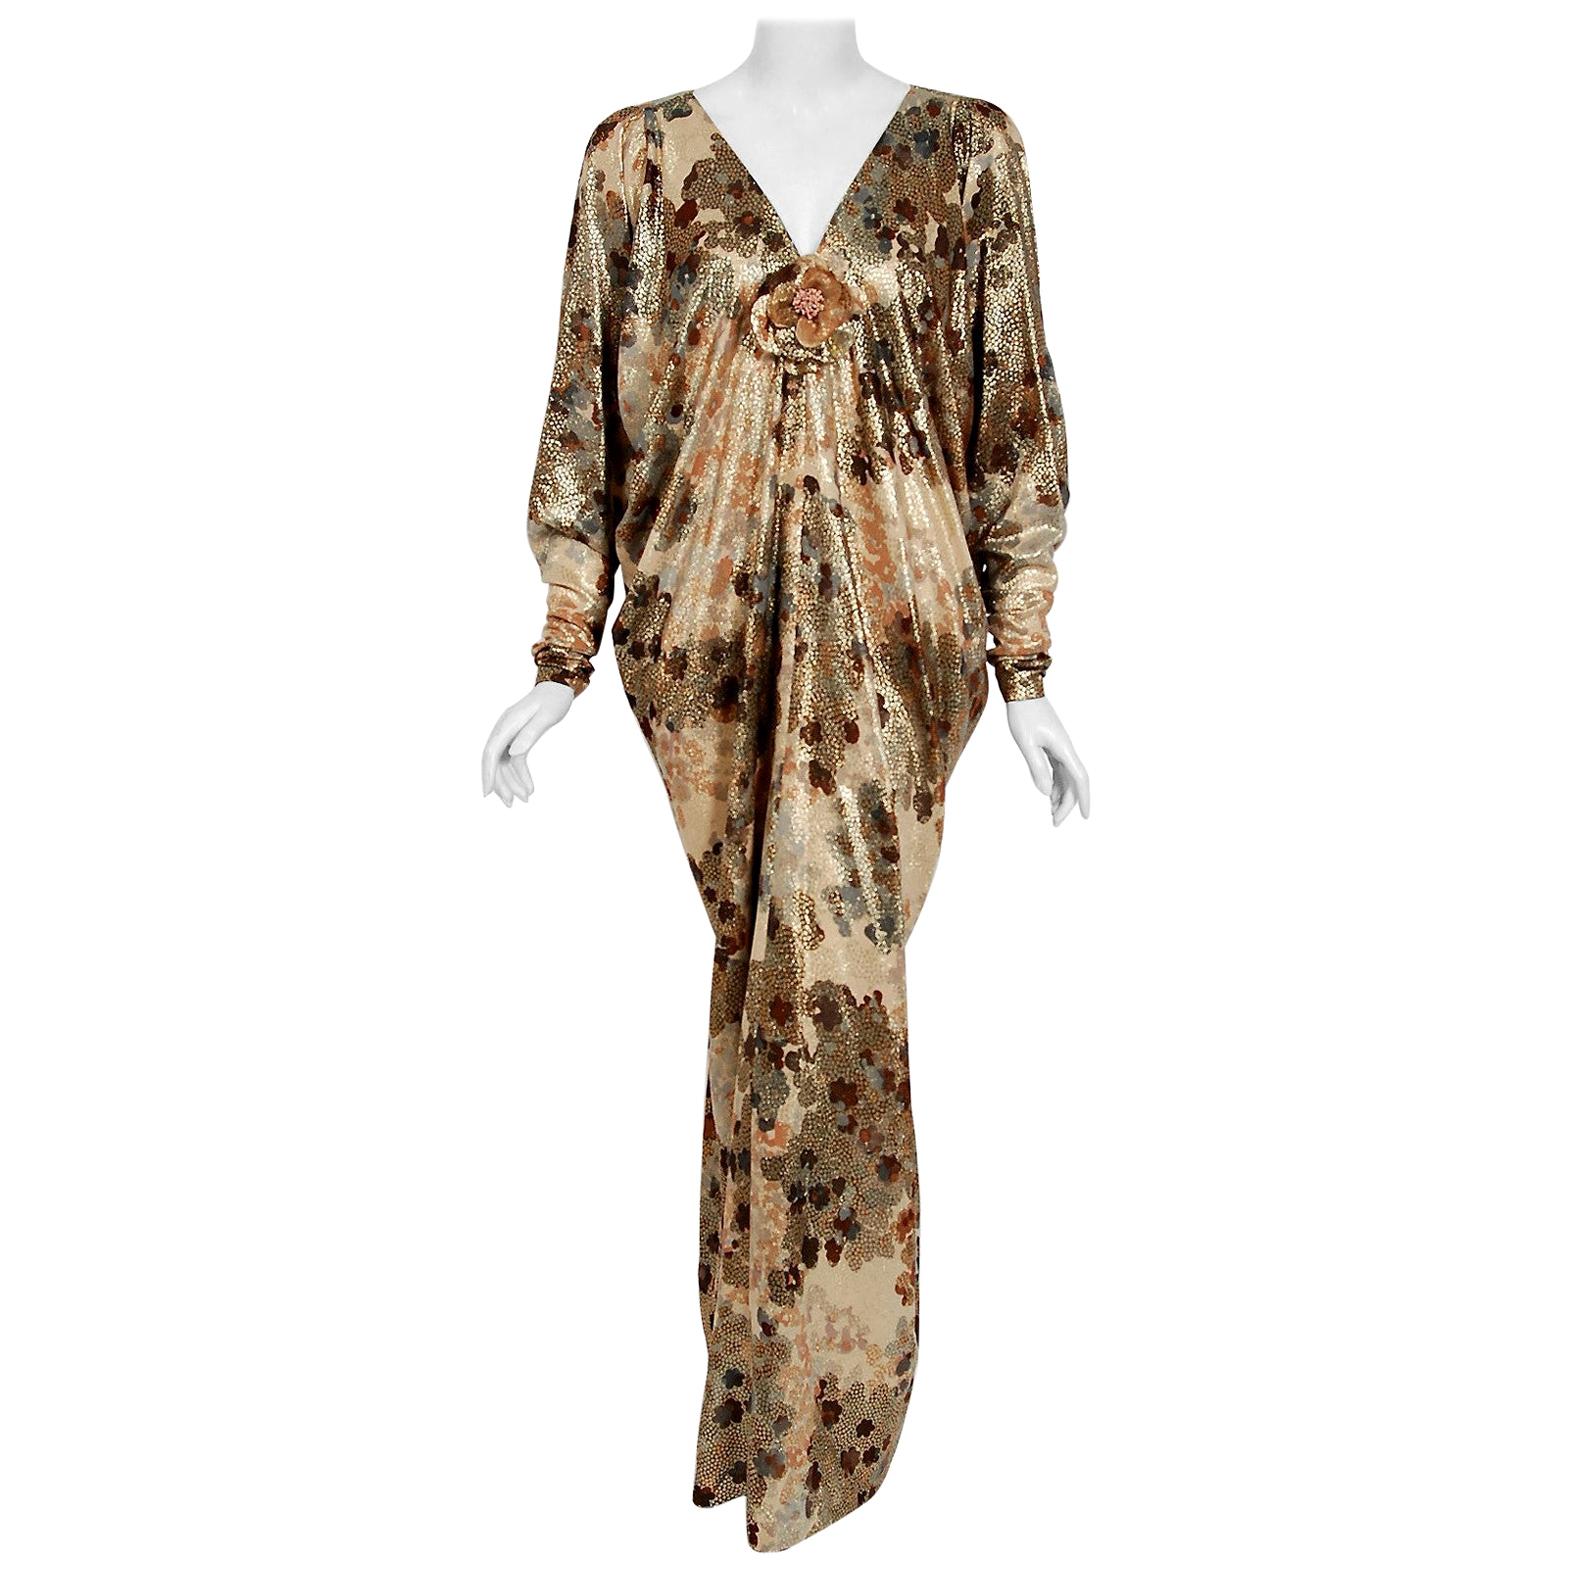 Breathtaking Yves Saint Laurent Haute-Couture documented caftan gown fashioned in a the most beautiful light-weight metallic print golden lamé silk. A similar version was featured on the cover of Elle France magazine September 1975. The fabric is